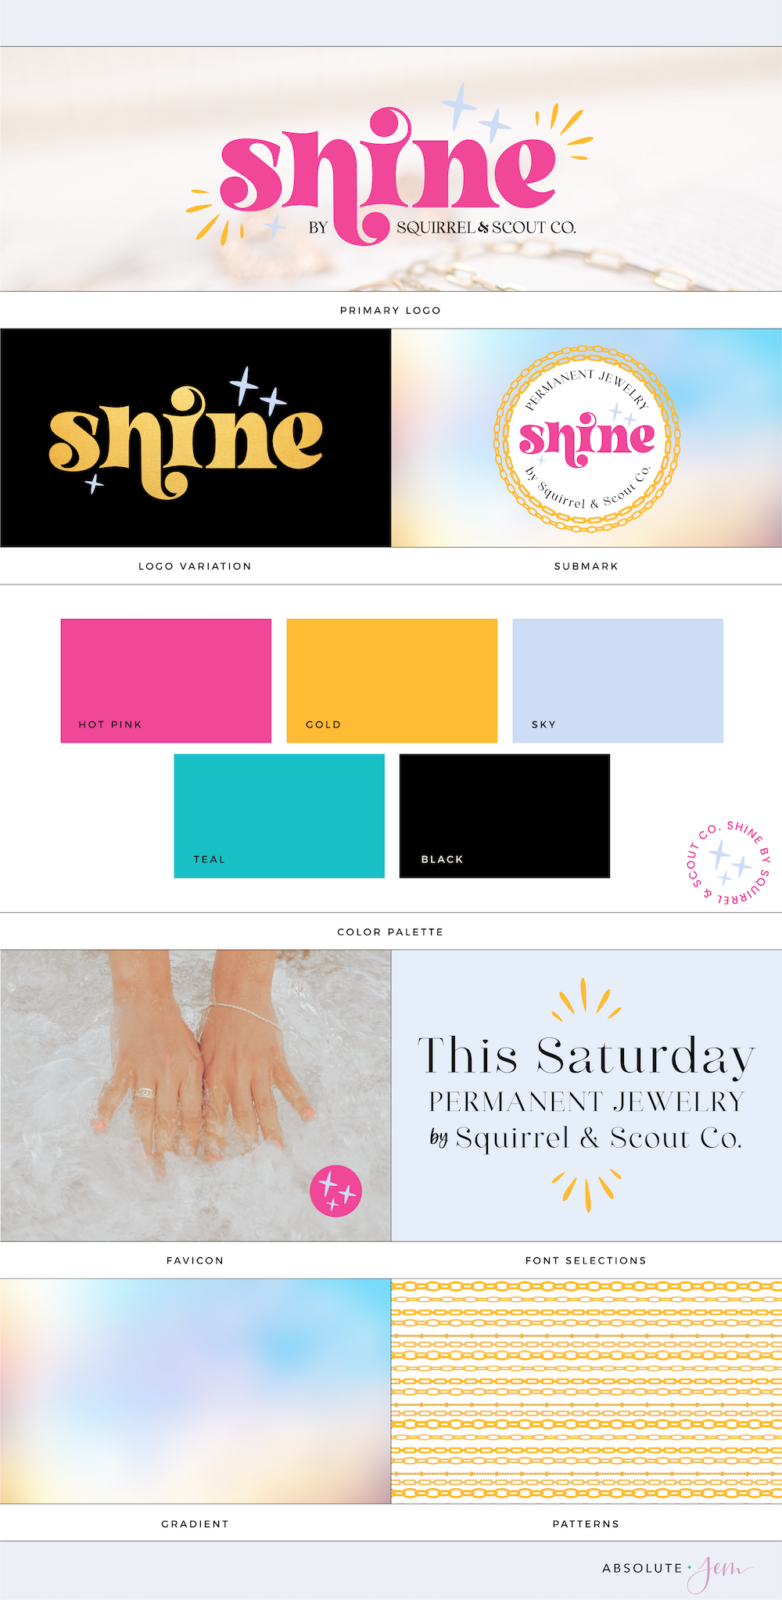 Brand Board for Shine: A Stylish Sub-Brand for Permanent Jewelry